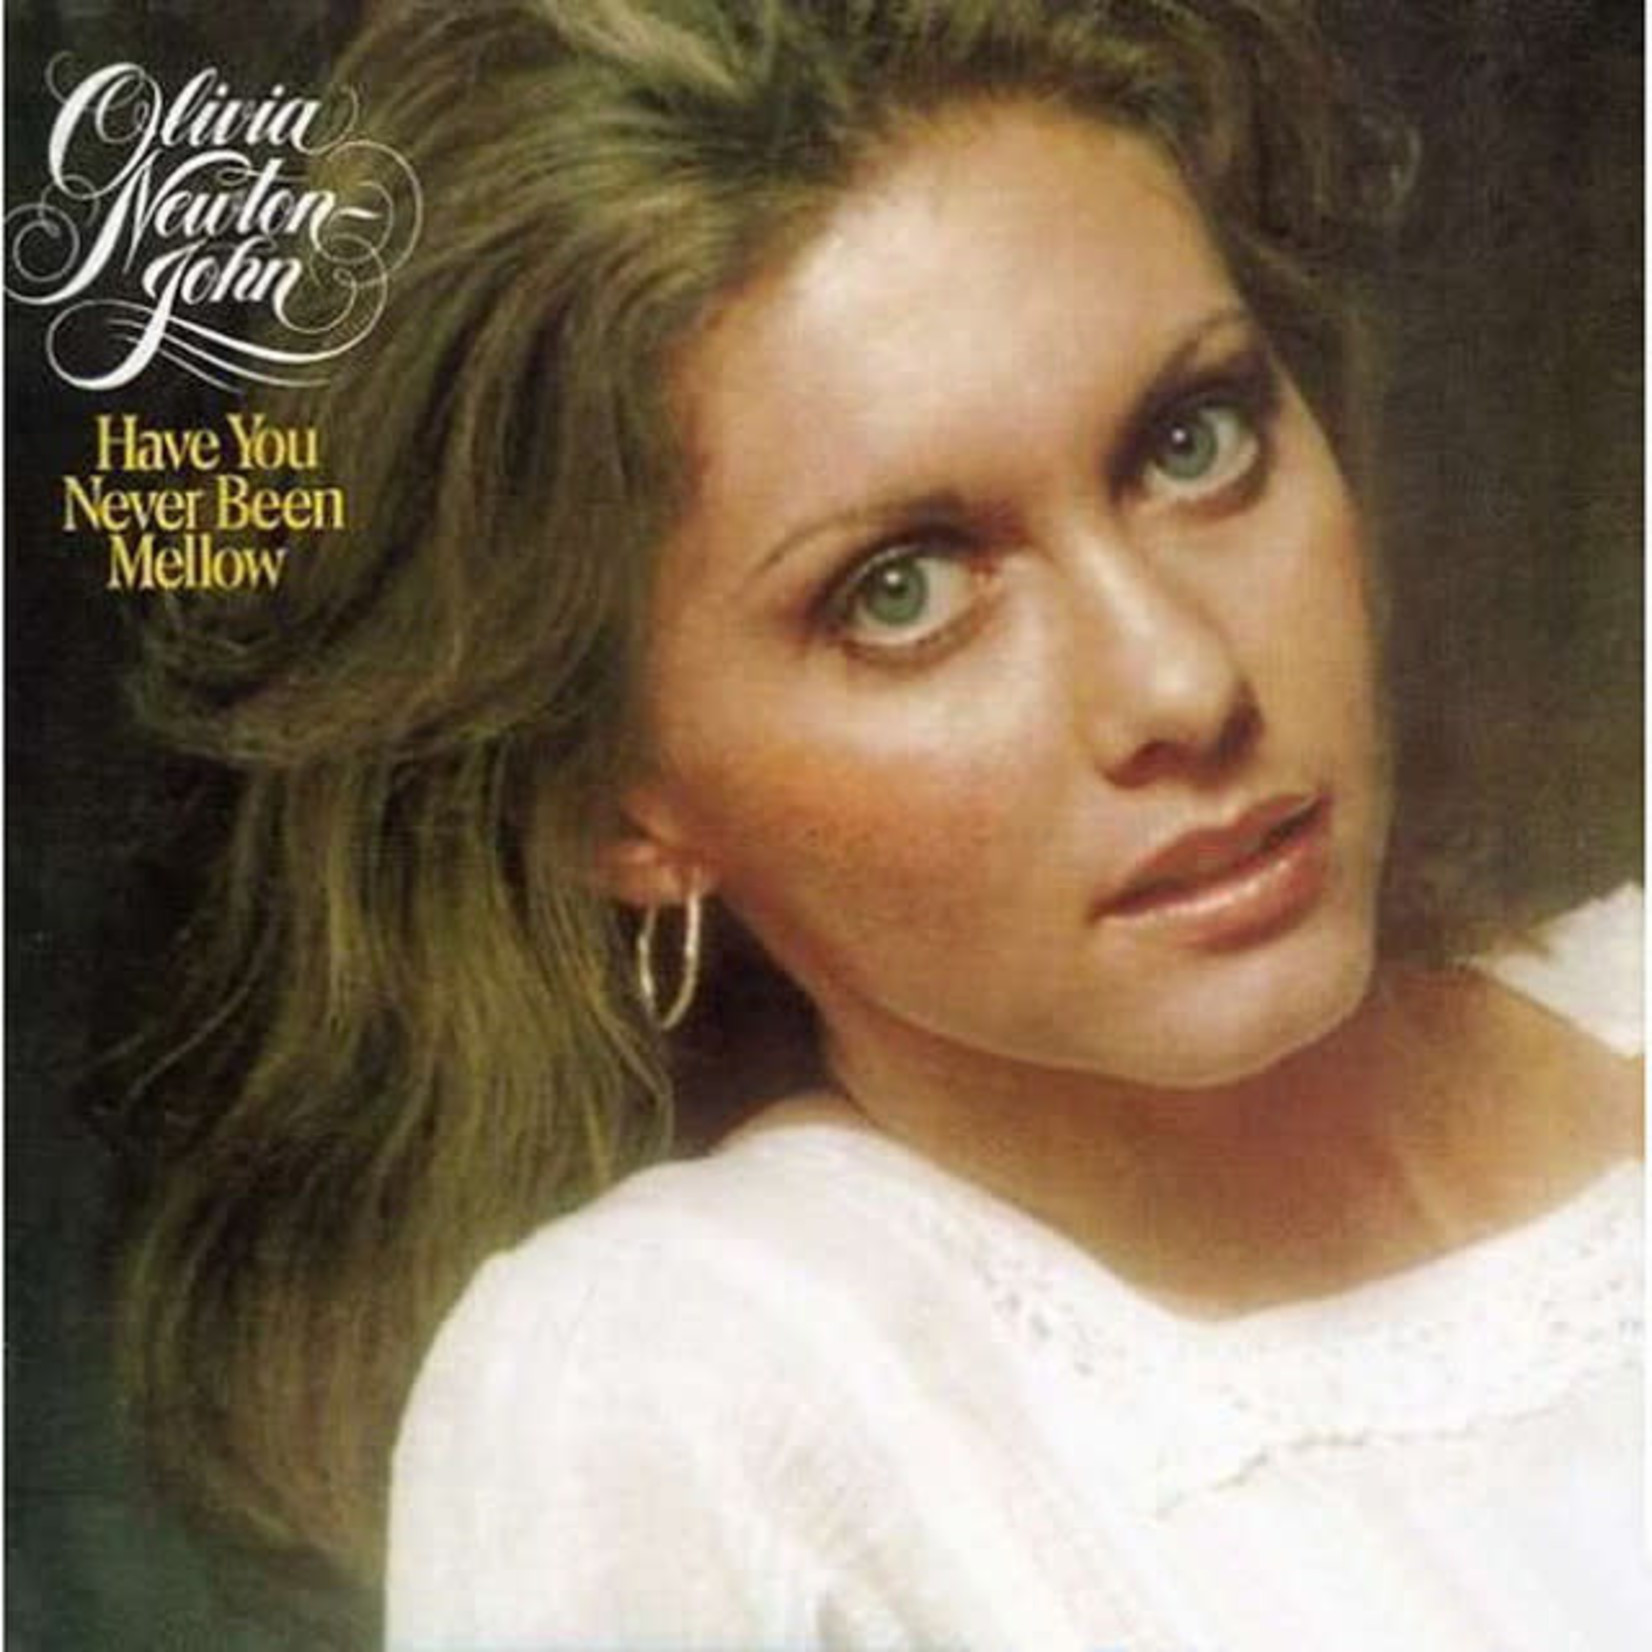 [Vintage] Olivia Newton-John - Have You Never Been Mellow